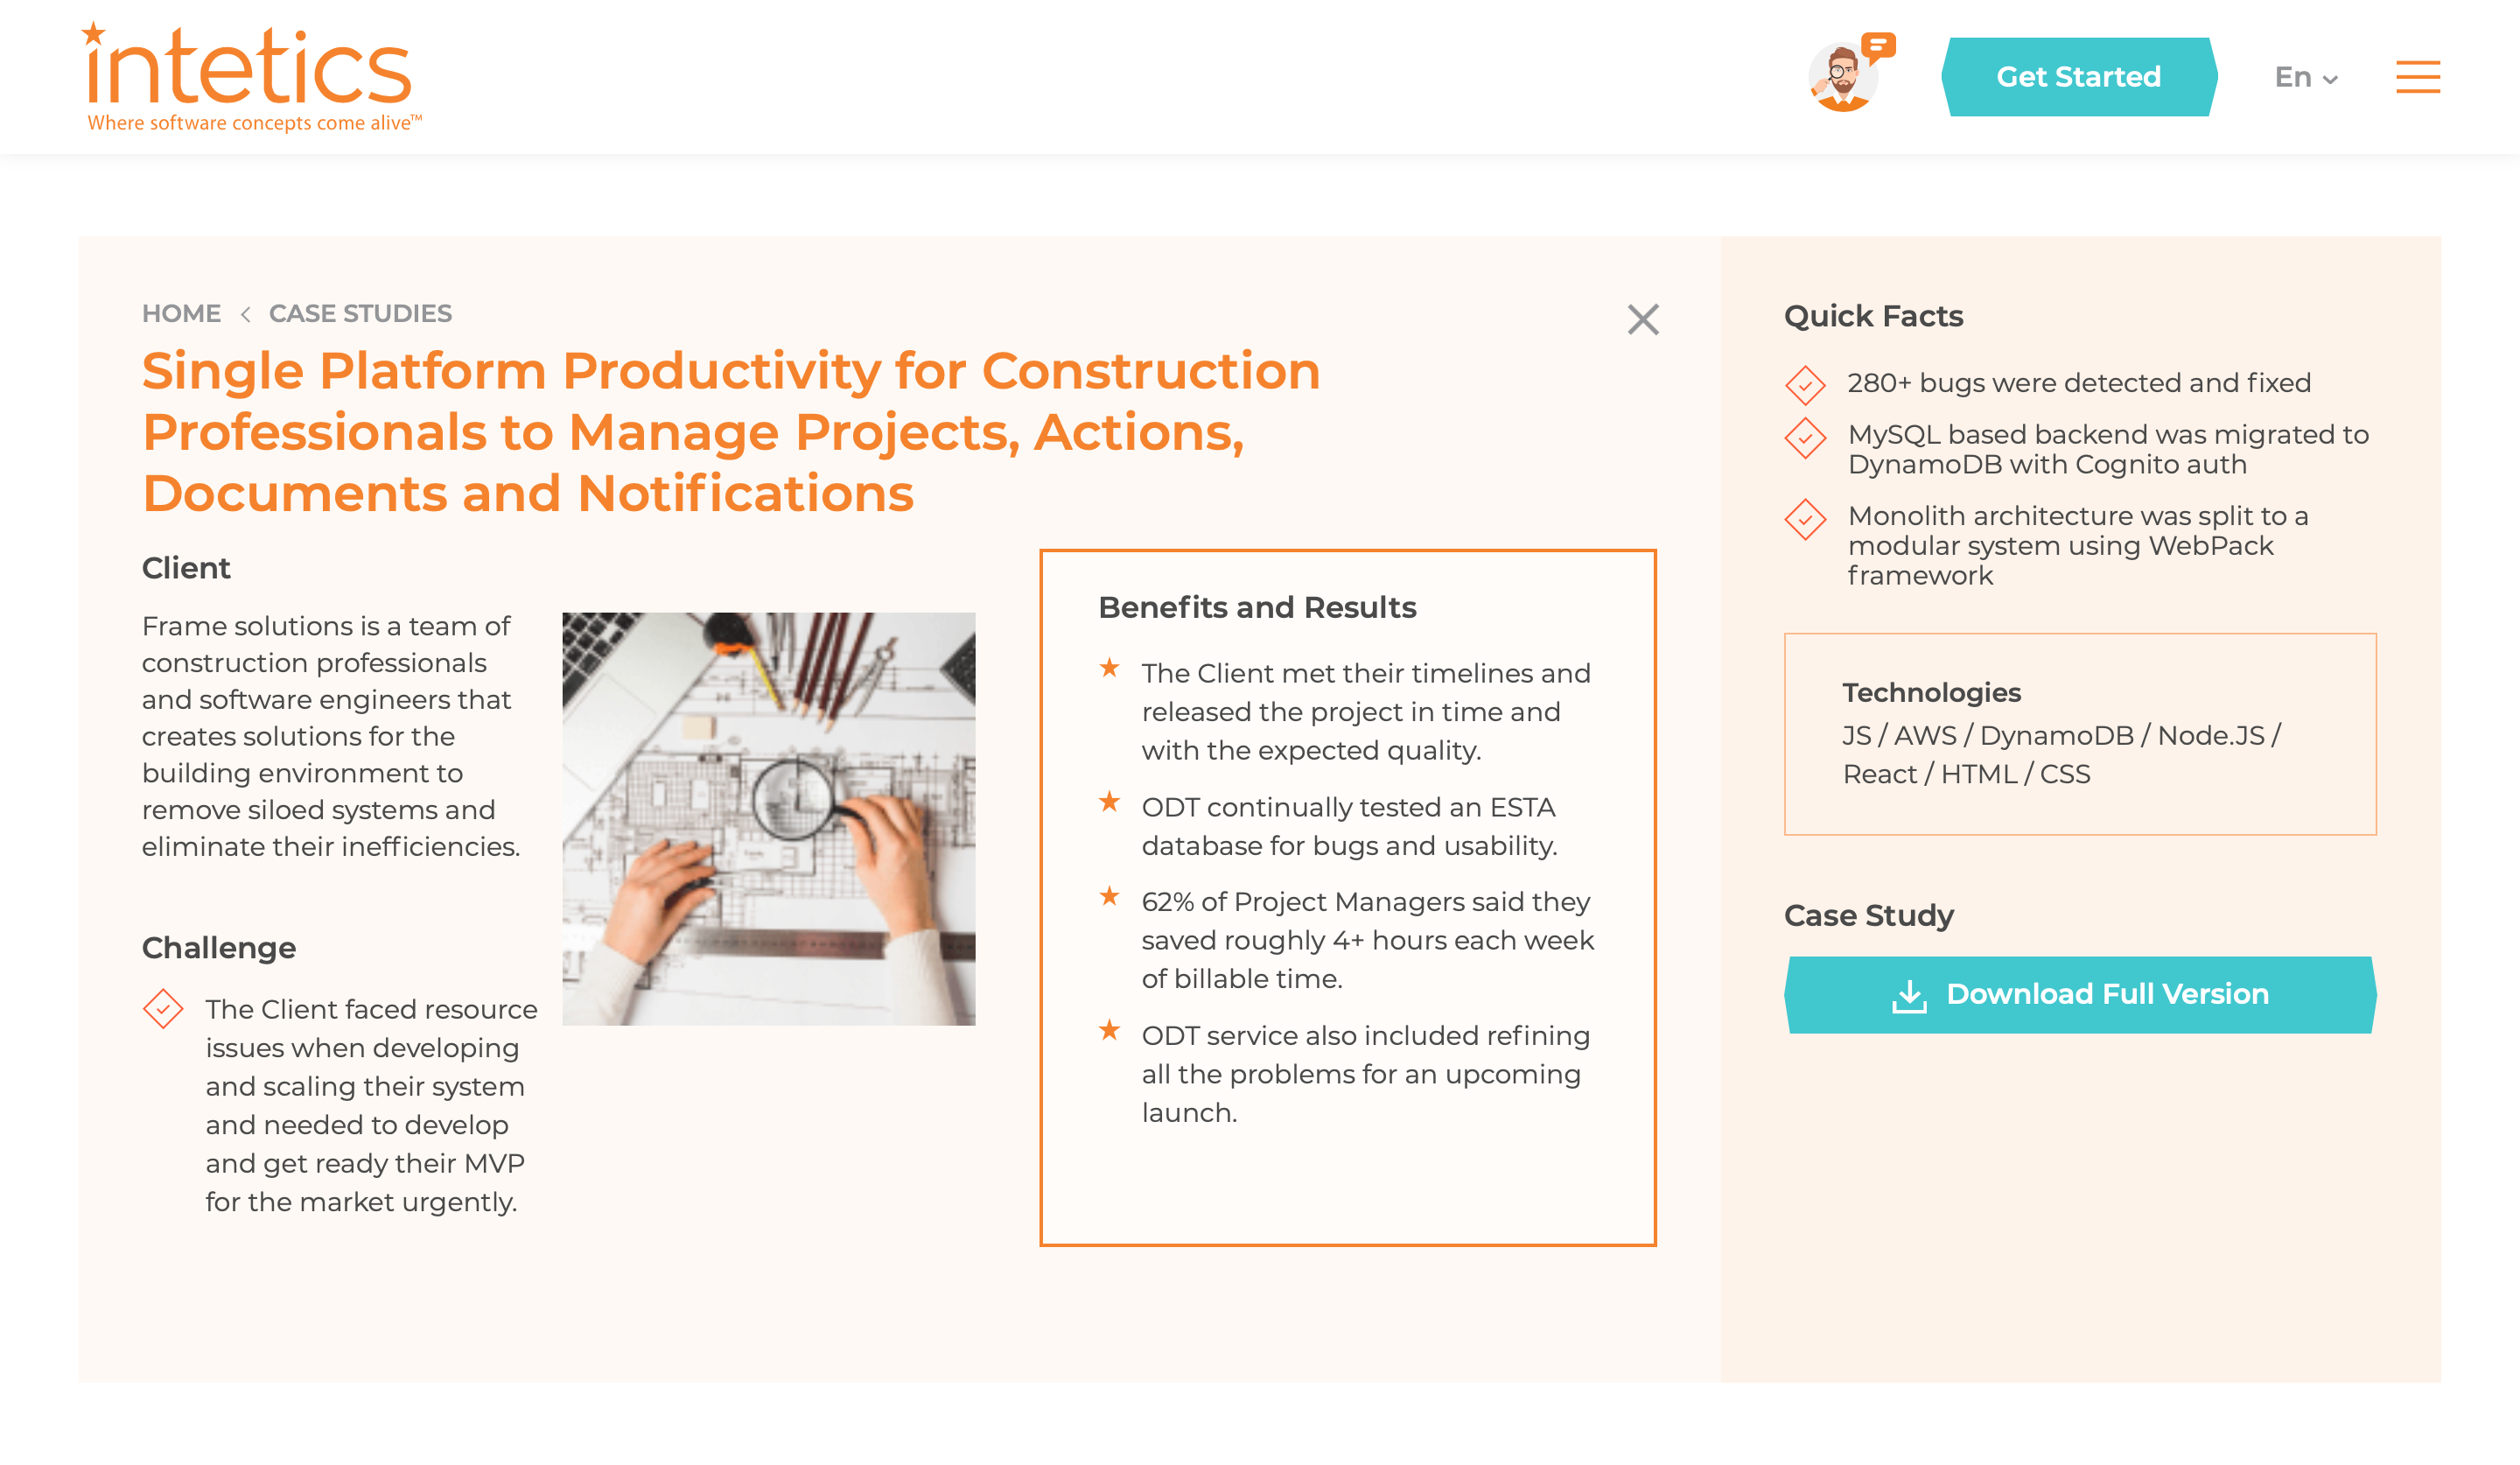 Single Platform Productivity for Construction Professionals to Manage Projects Actions Documents and Notifications